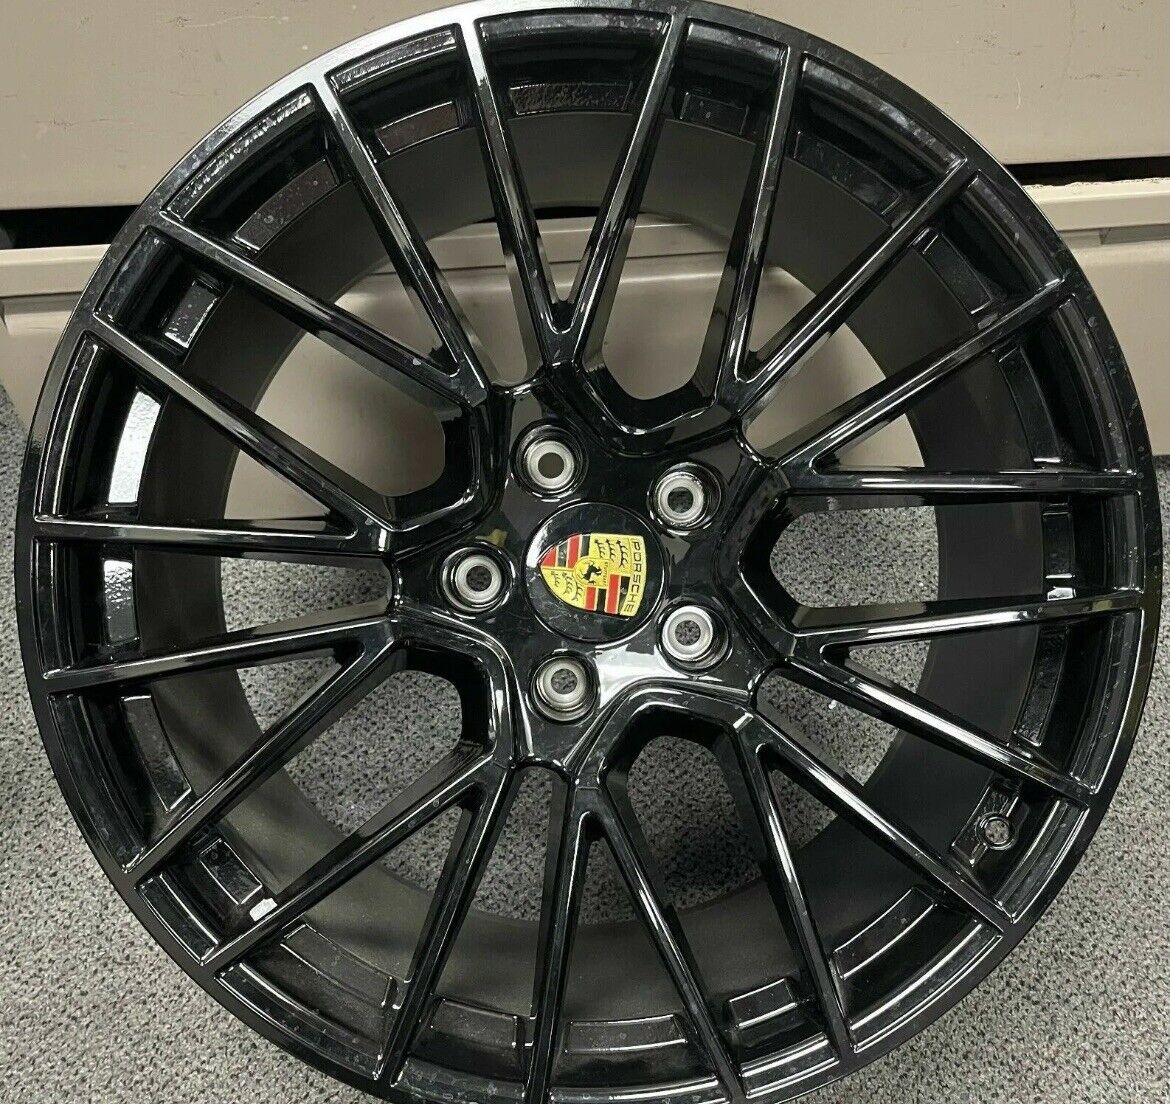 22'' Wheels fit Porsche Panamera Gloss Black Staggered Tires Cayenne New TPMS